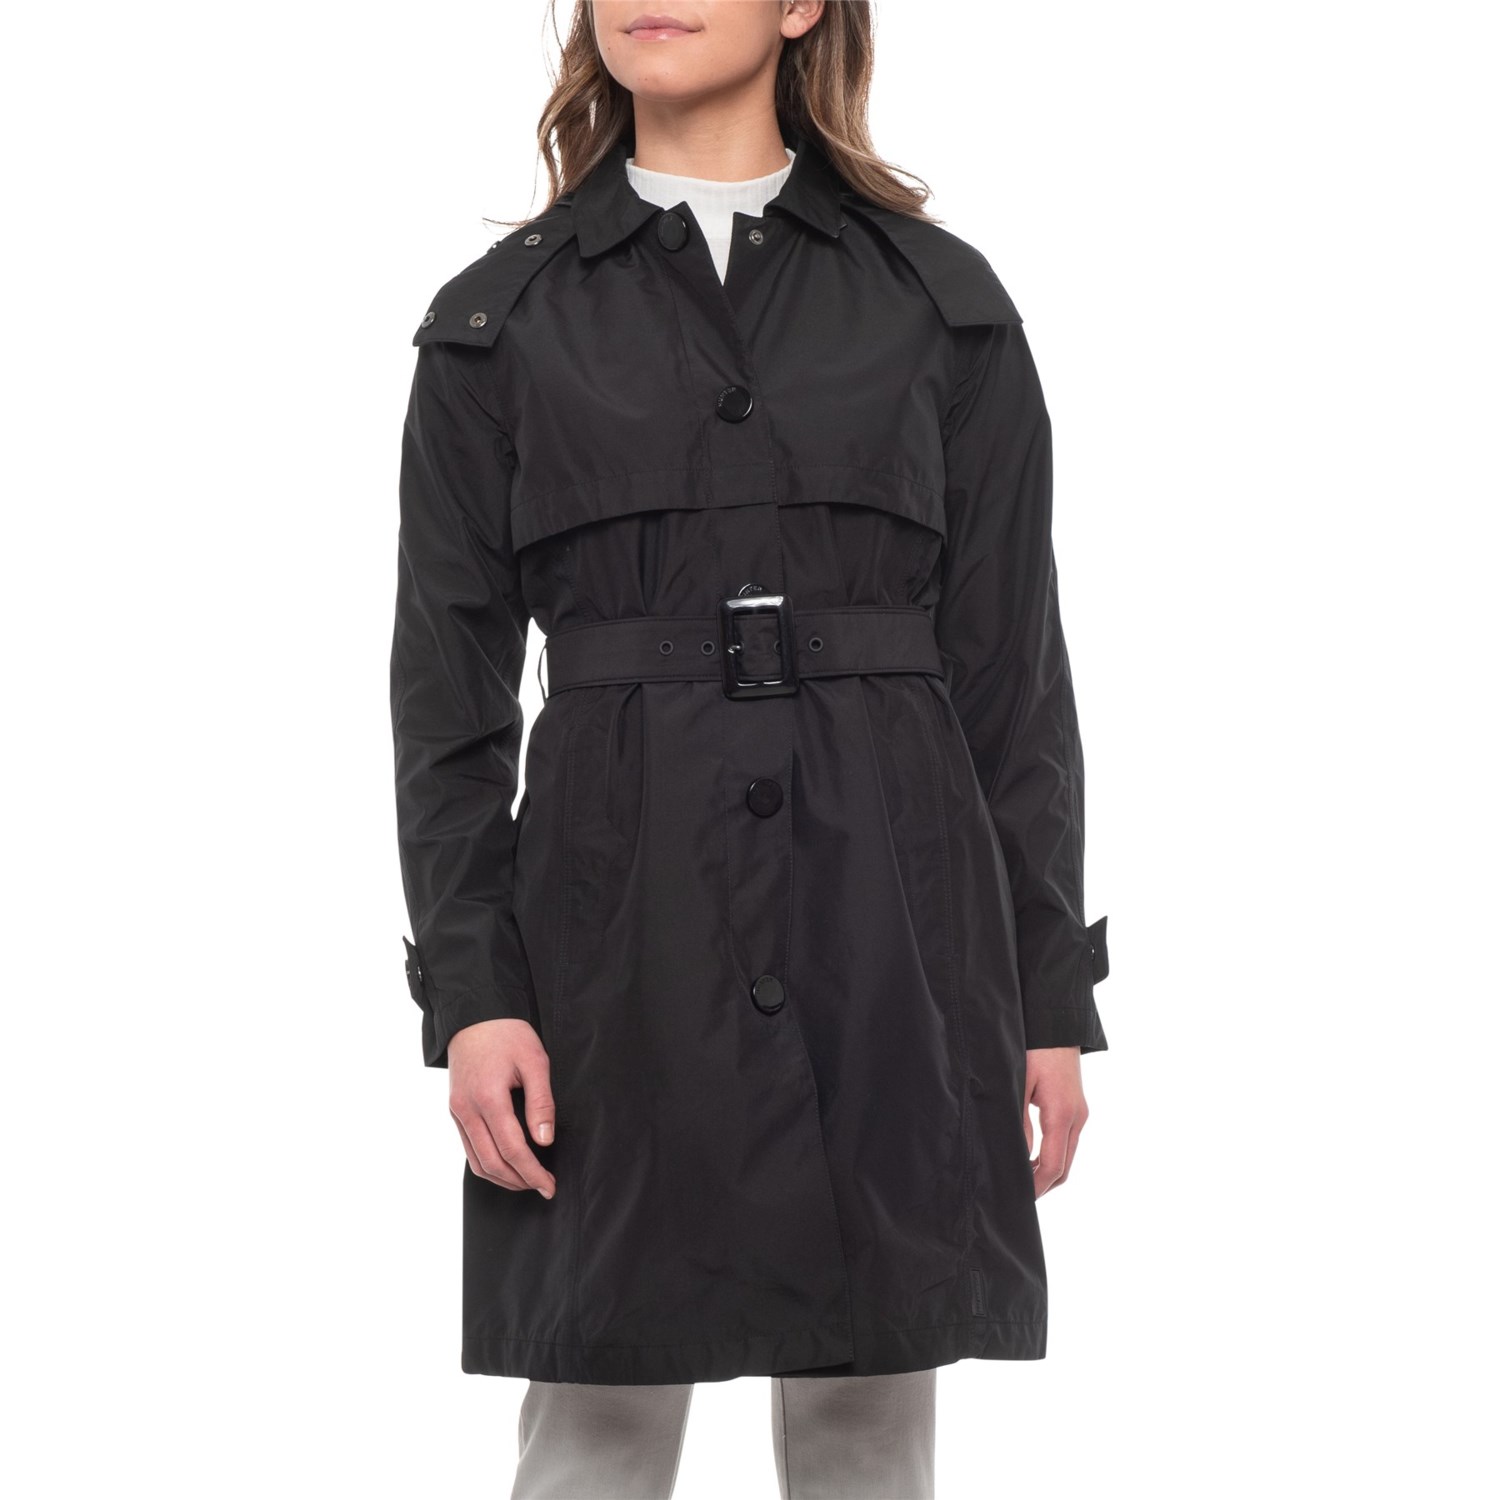 HUNTER Original Refined Trench Coat (For Women) - Save 73%